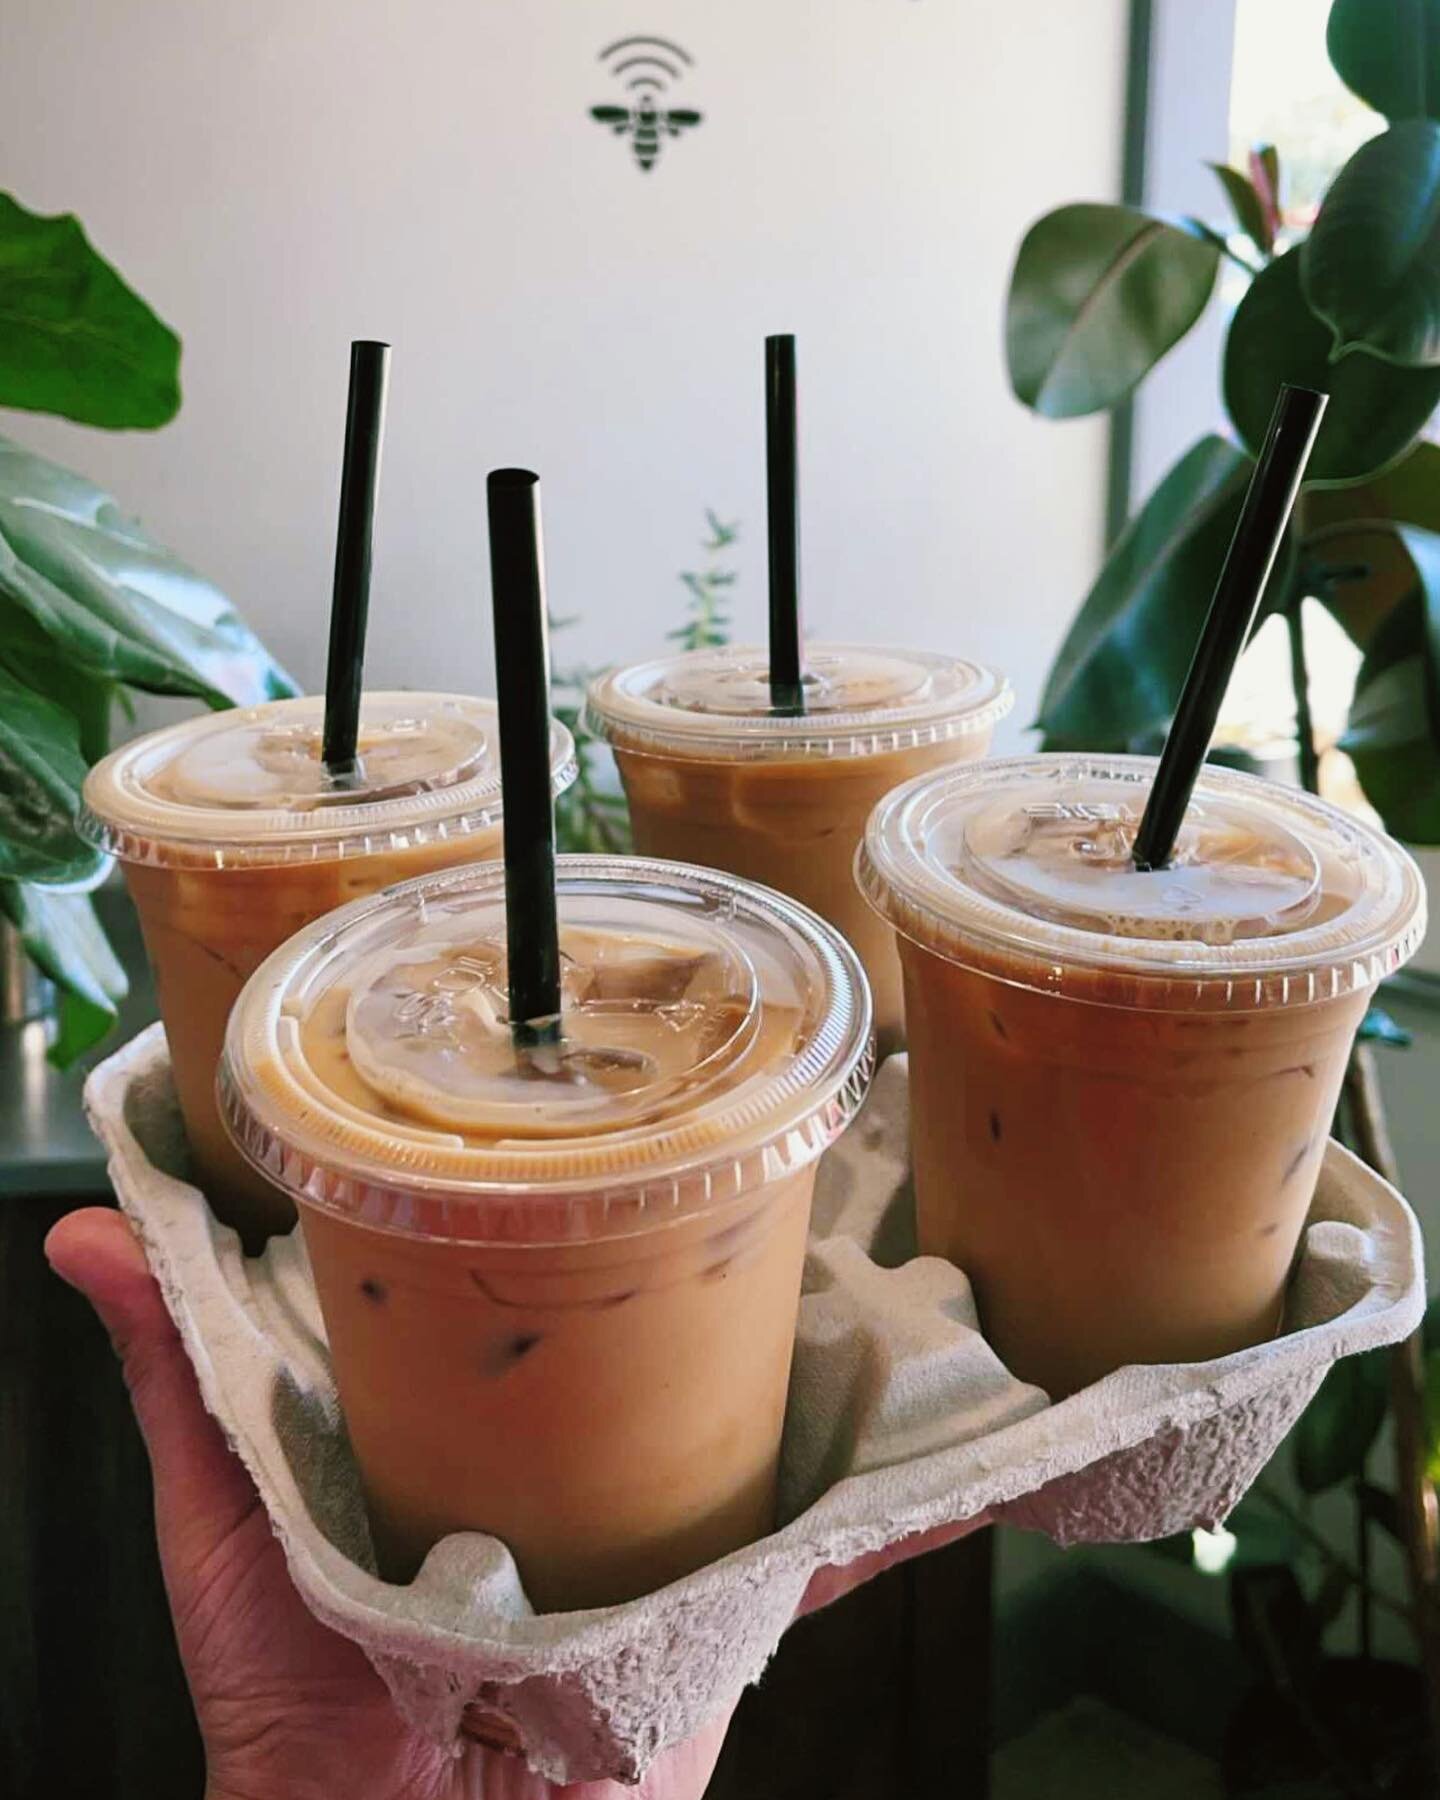 Not all coworkers are created equal 🤌🏽🤌🏽🤌🏽

Need a quick pick me up for your team? Drop by or order on the Buka Maranga App for some mid morning goodness☕️🥰

Shoutout to our regular 🐝 @jaredshadir  who makes sure his team is happily caffeinat